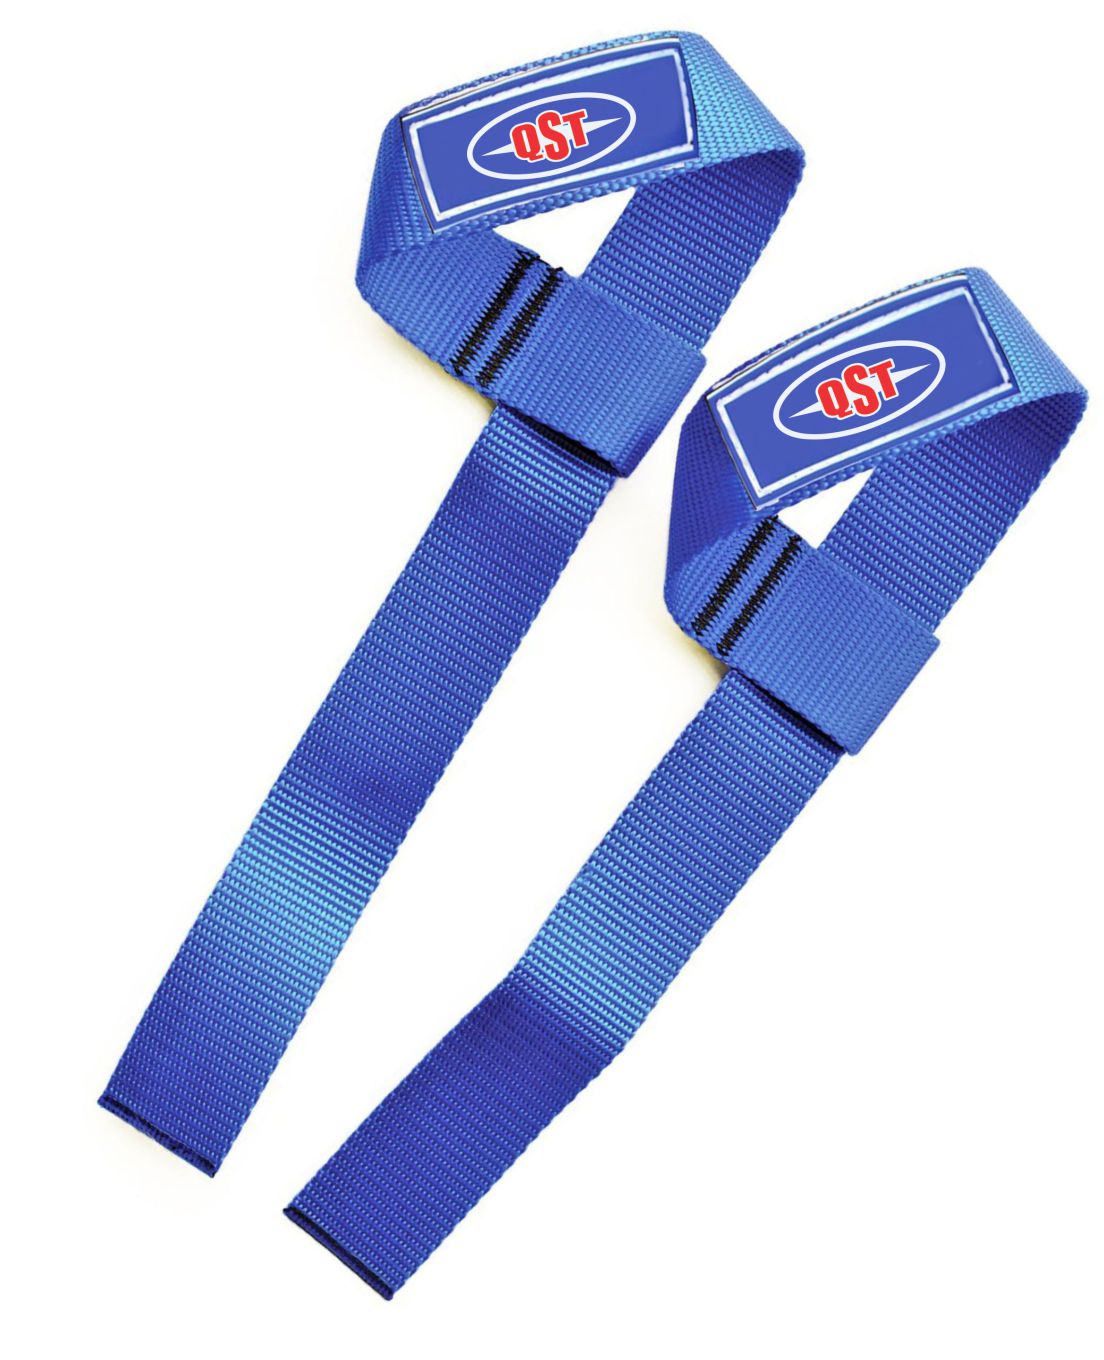 Weight lifting Straps - ACS-1570